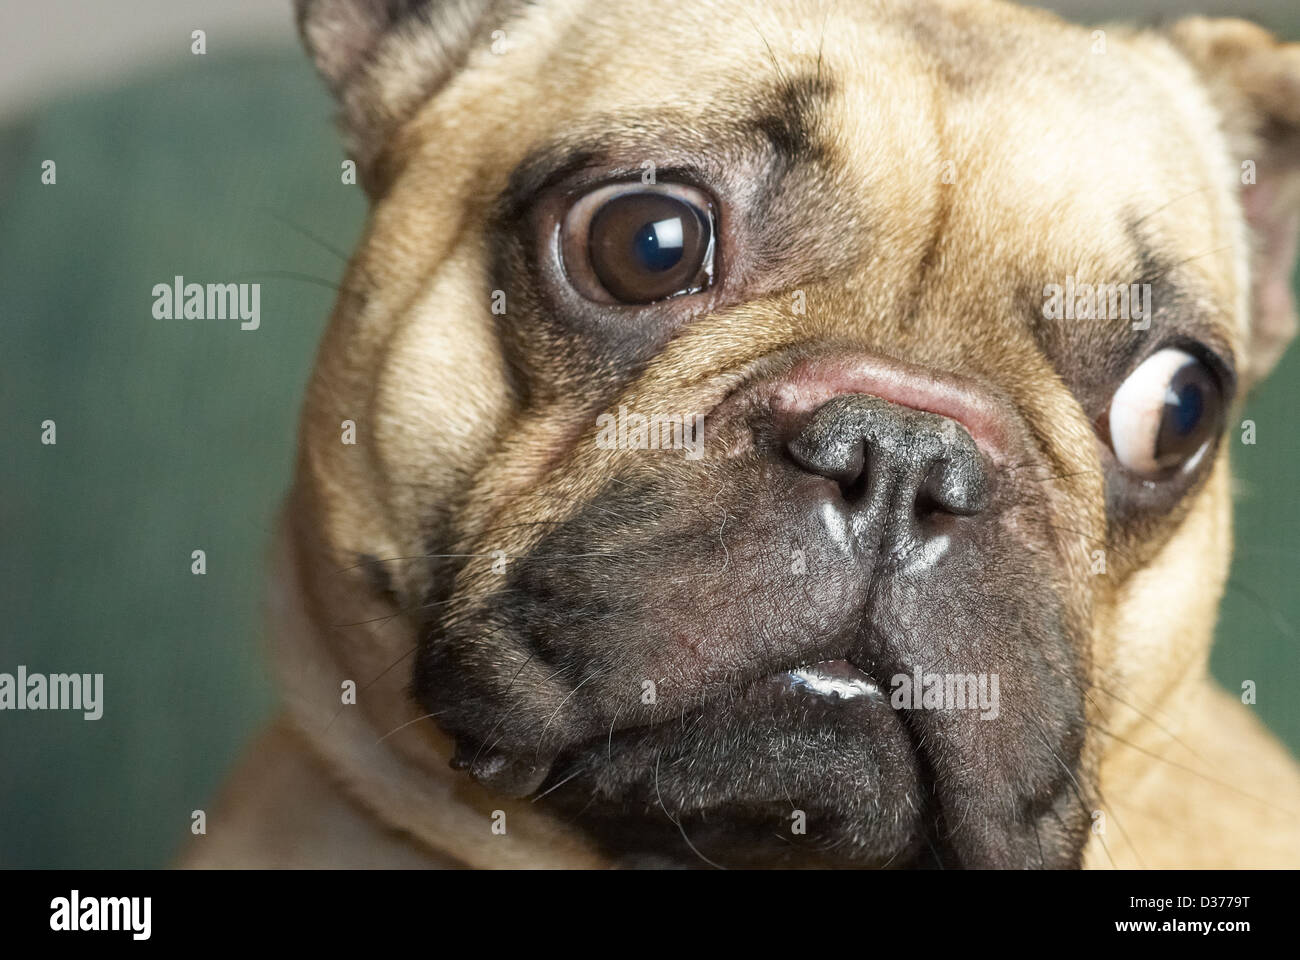 Pug nose High Resolution Stock Photography and Images - Alamy